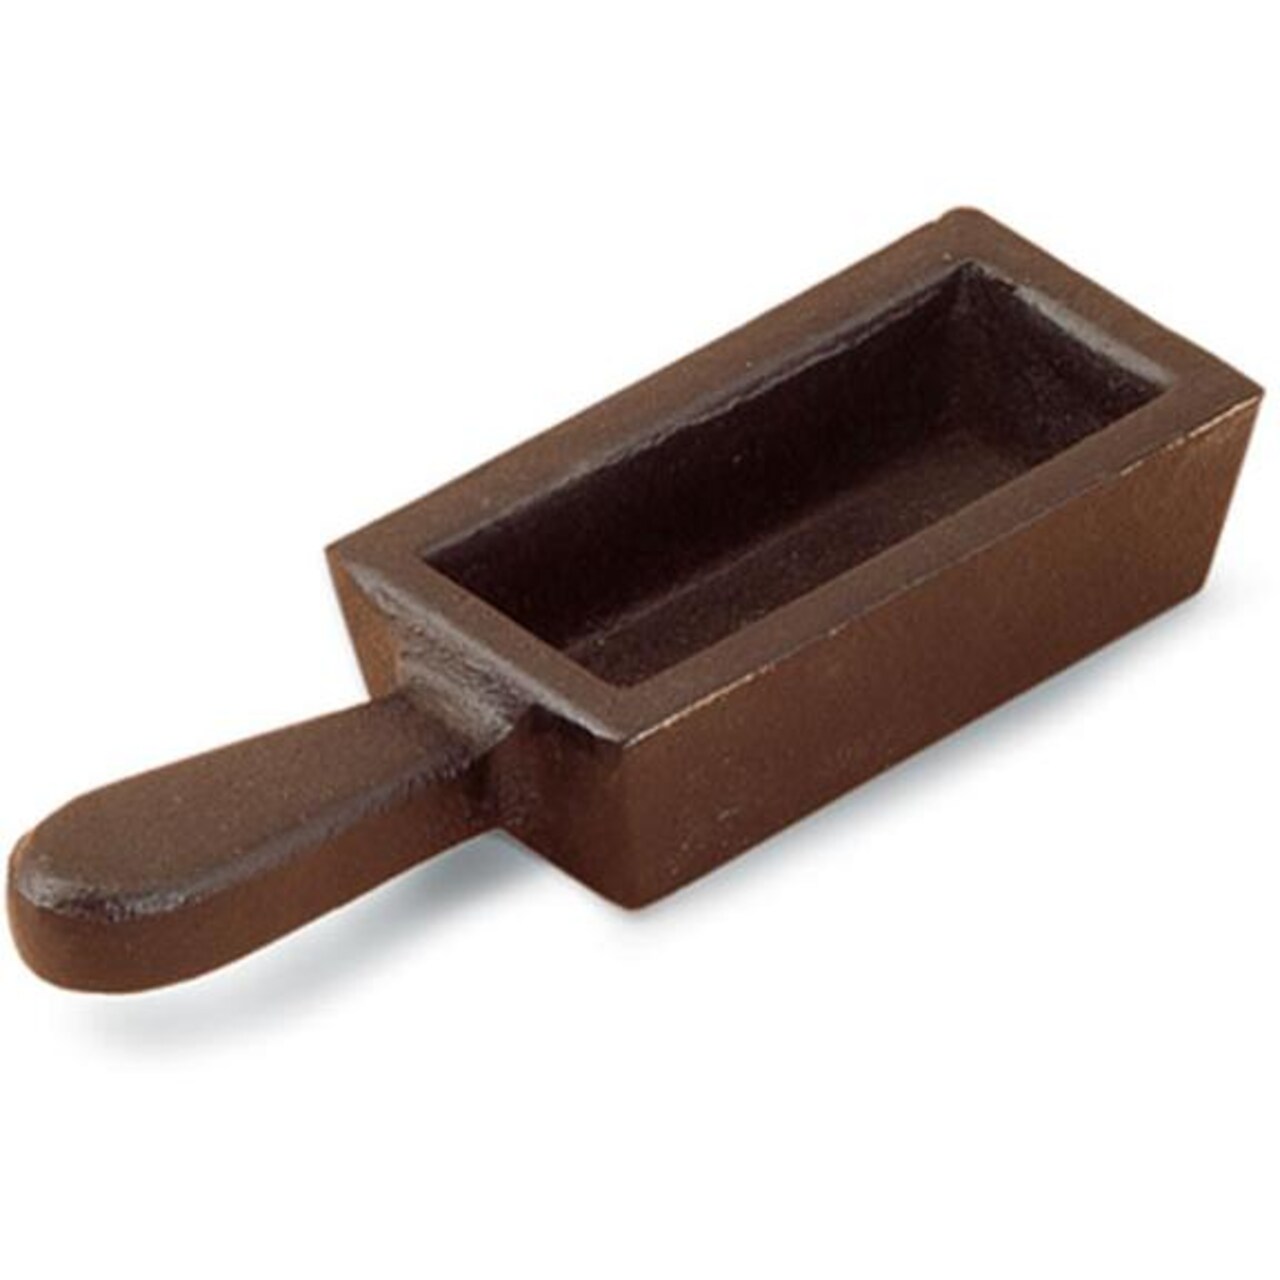 Cast Iron Open Ingot Mold 120x45x30 mm 124g 4 oz Capacity for Gold and Silver